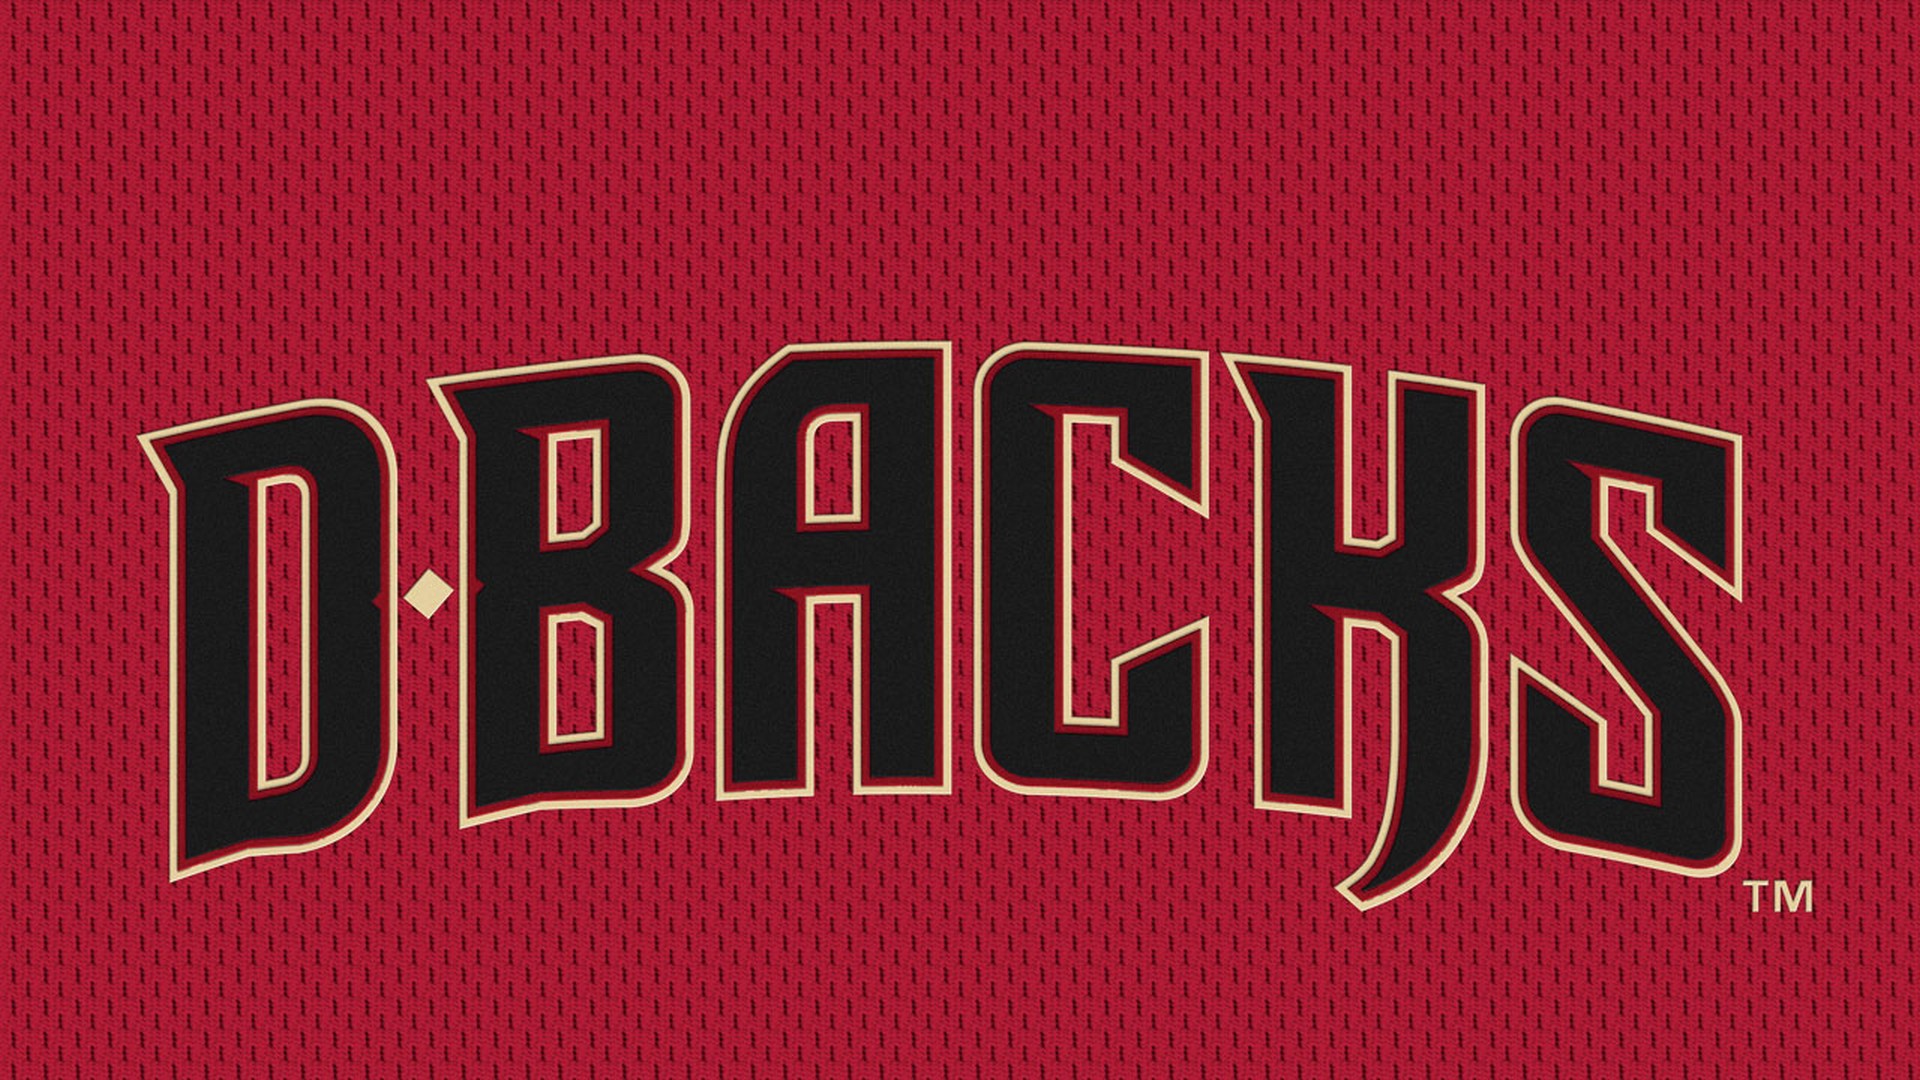 Arizona Diamondbacks MLB Backgrounds HD With high-resolution 1920X1080 pixel. You can use this wallpaper for Mac Desktop Wallpaper, Laptop Screensavers, Android Wallpapers, Tablet or iPhone Home Screen and another mobile phone device